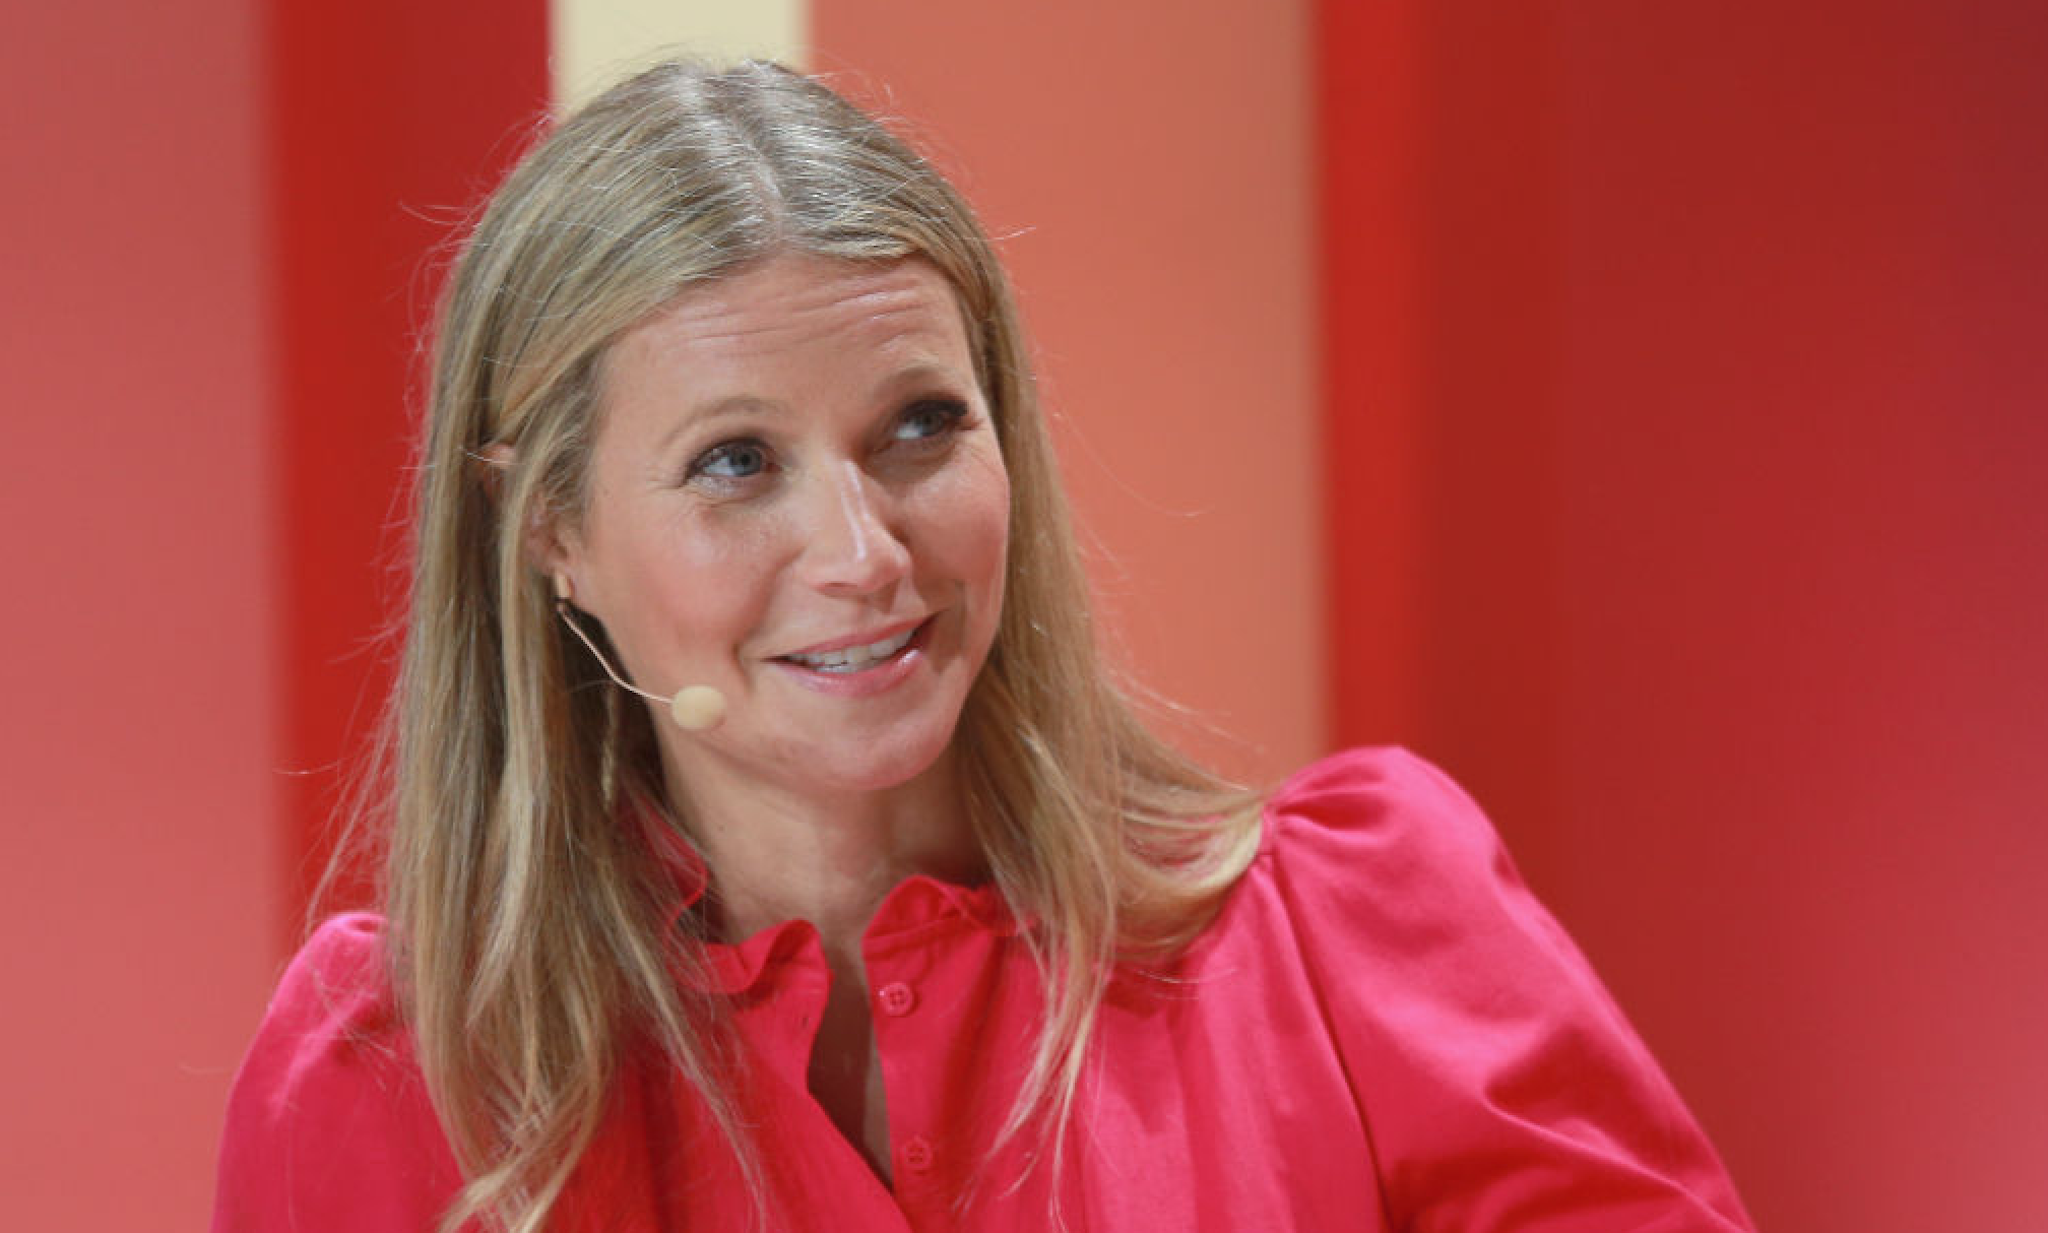 Goop founder Gwyneth Paltrow speaks on stage at the 2018 Girlboss Rally at Magic Box on April 28, 2018 in Los Angeles, California.